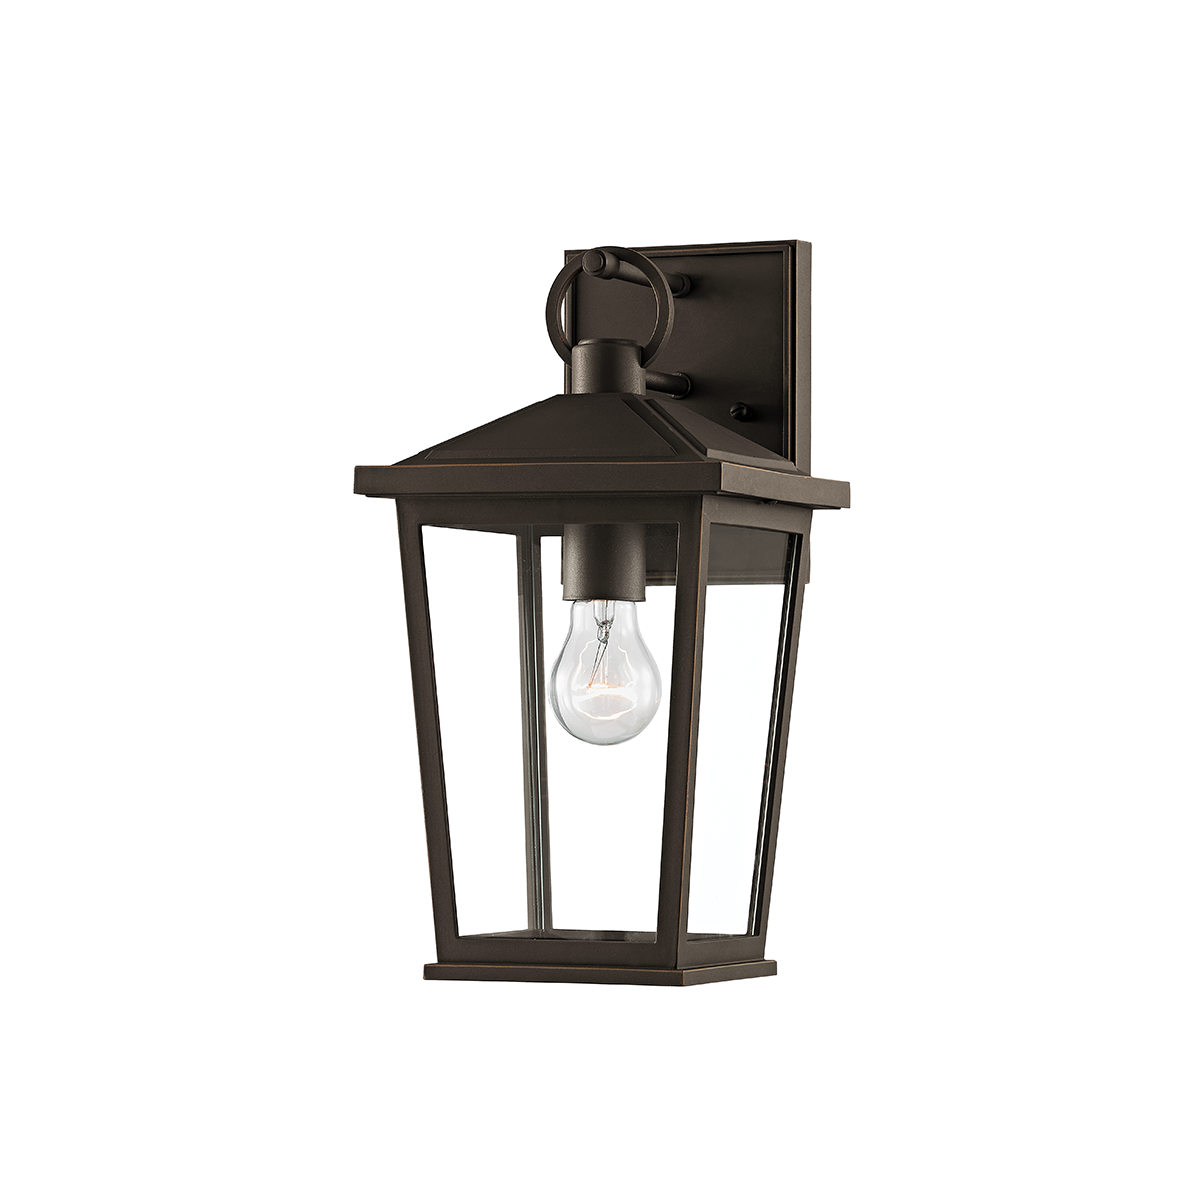 Troy SOREN 1 LIGHT SMALL EXTERIOR WALL SCONCE B8901 Outdoor l Wall Troy Lighting TEXTURED BRONZE W/ HL  